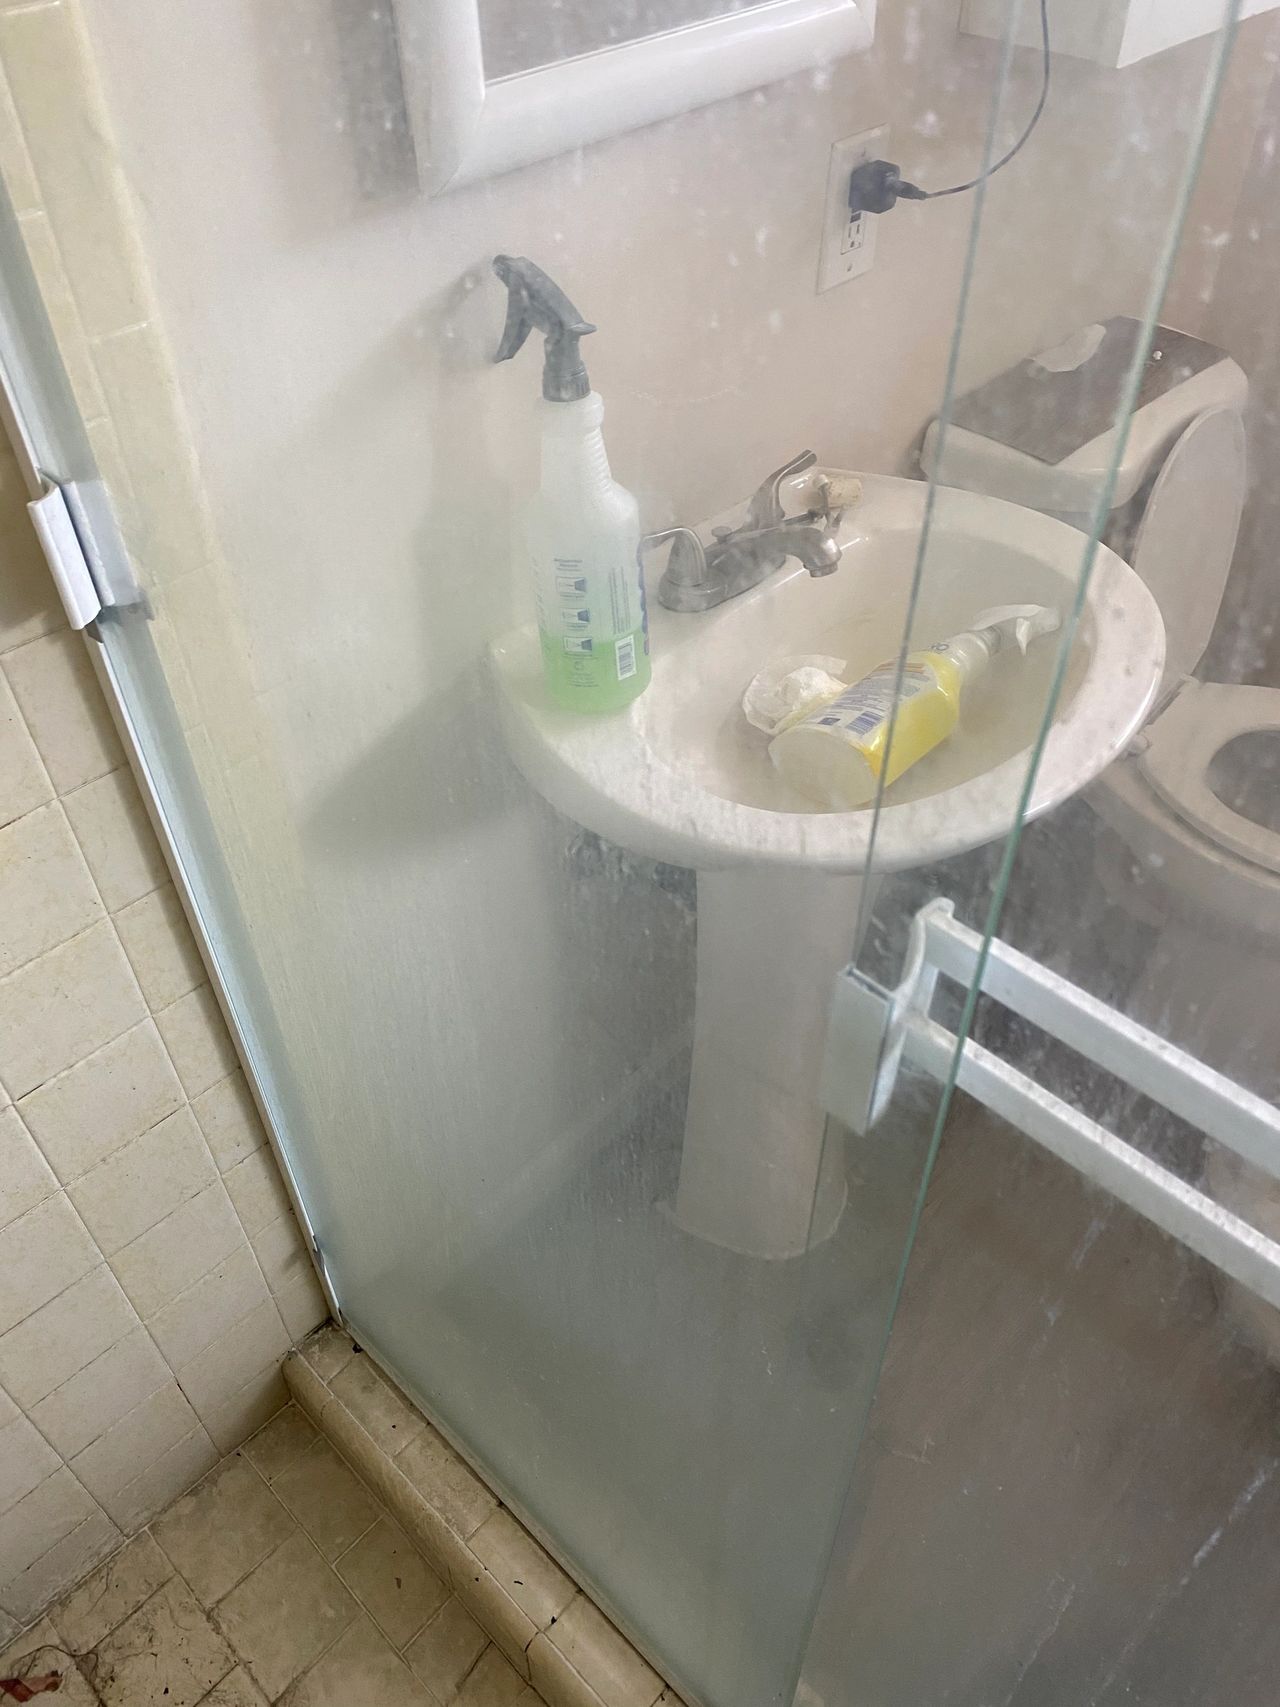 How to Remove Hard Water Stains From a Glass Shower